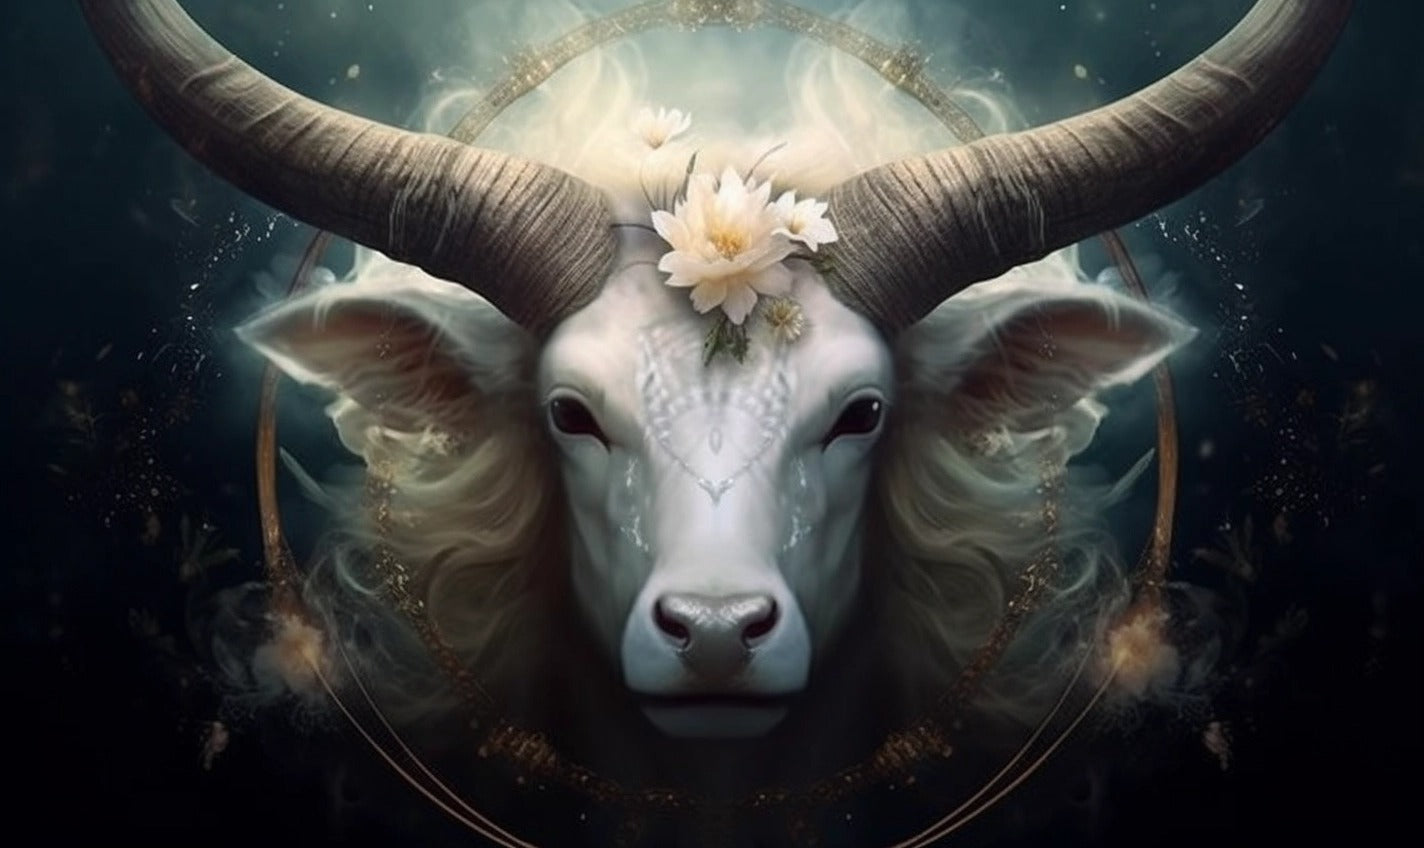 AI image of a bull representing the zodiac sign Taurus in a new moon with clouds in a night sky